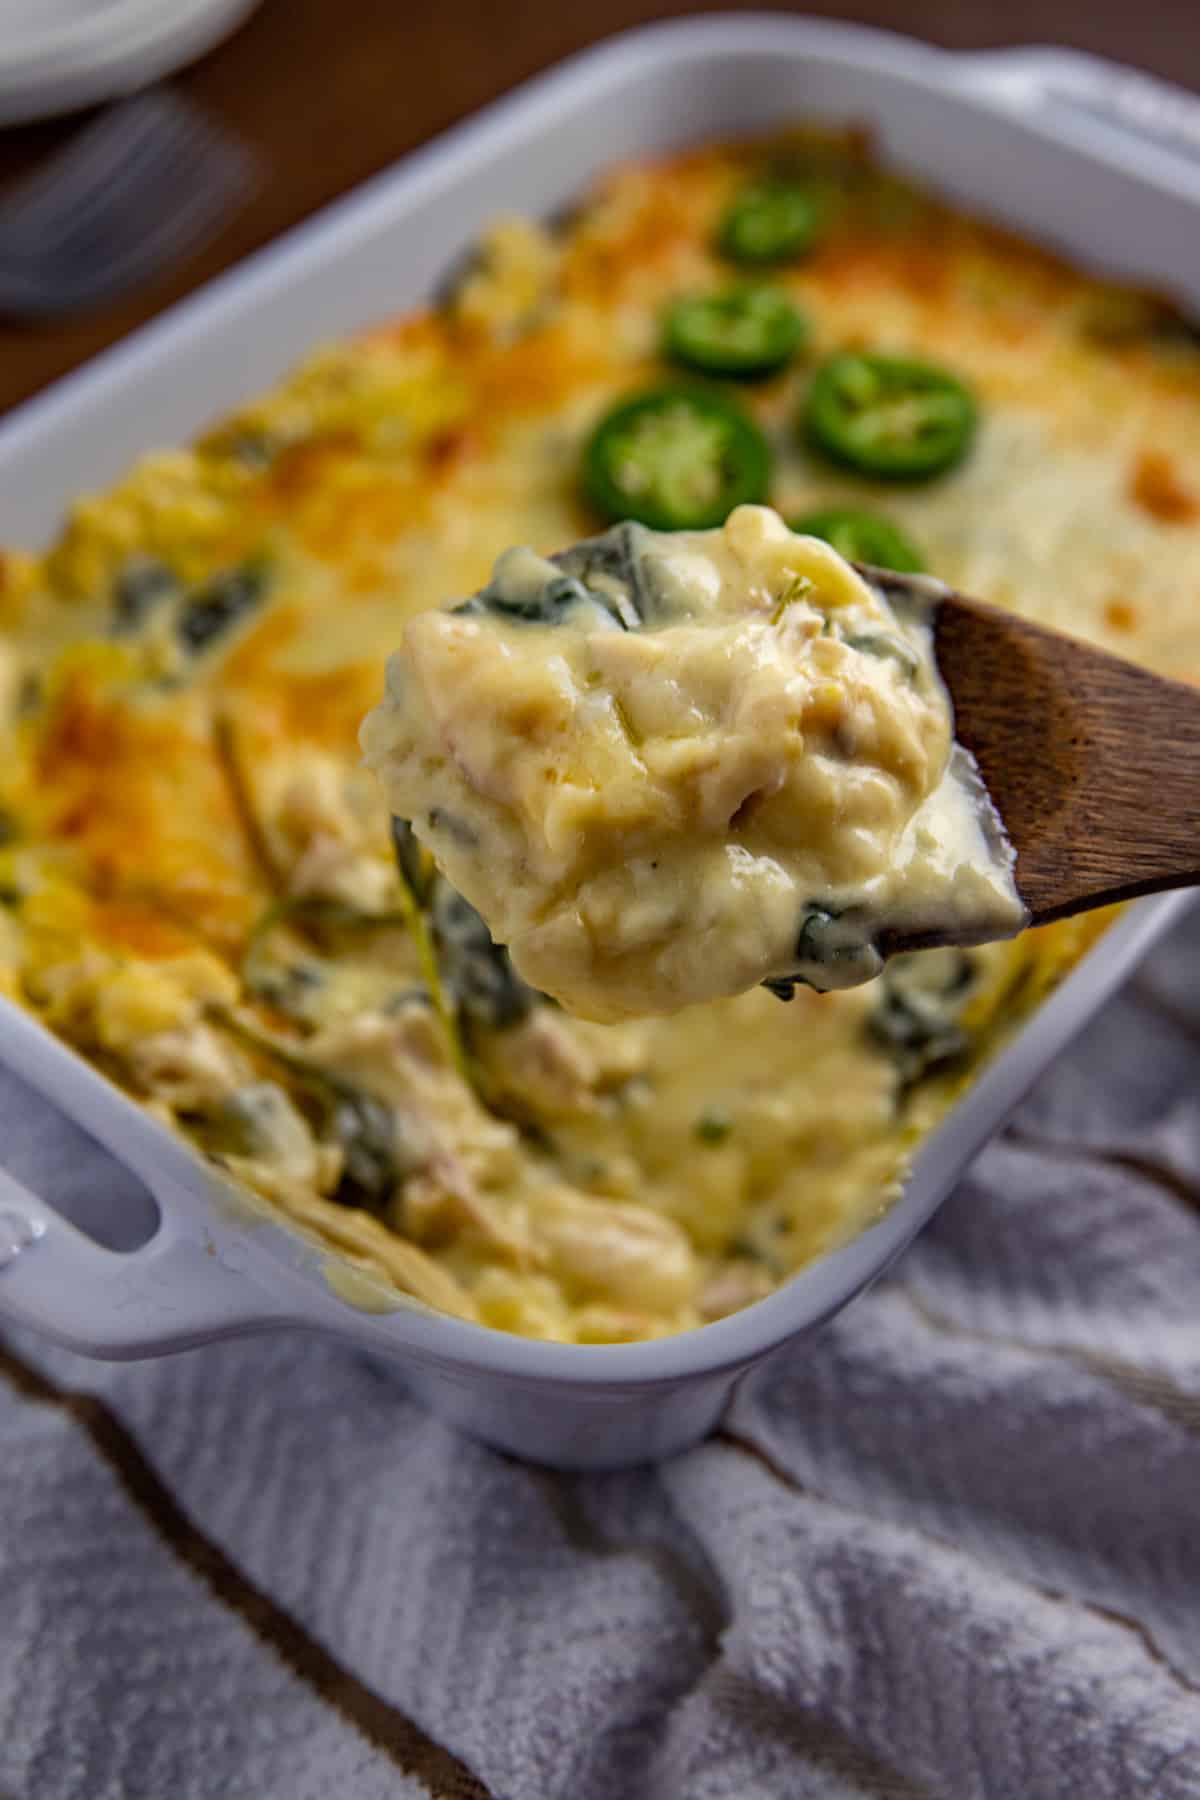 baked keto mexican casserole in oblong white dish with wooden spoon scooping out a serving.